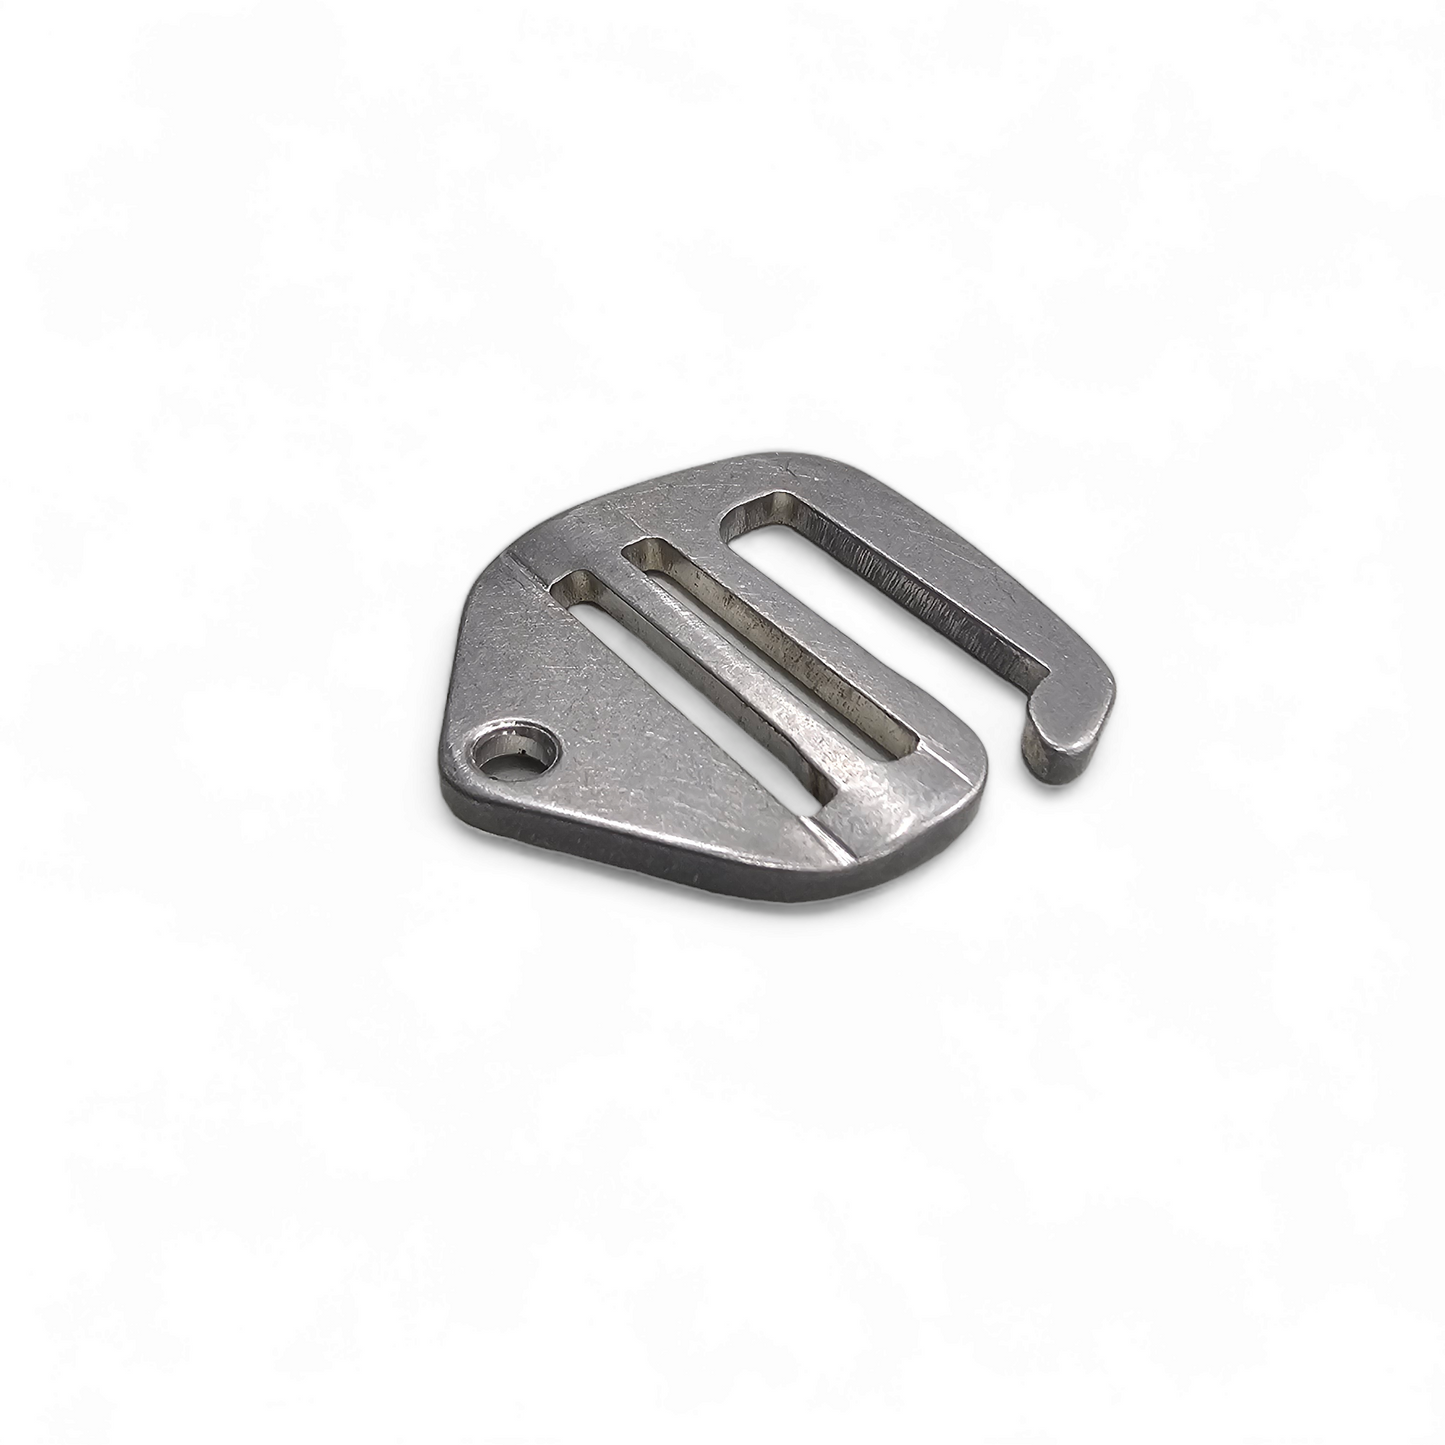 Titanium G Hook Quick Release Buckle for Cordage and Straps – Woods Monkey